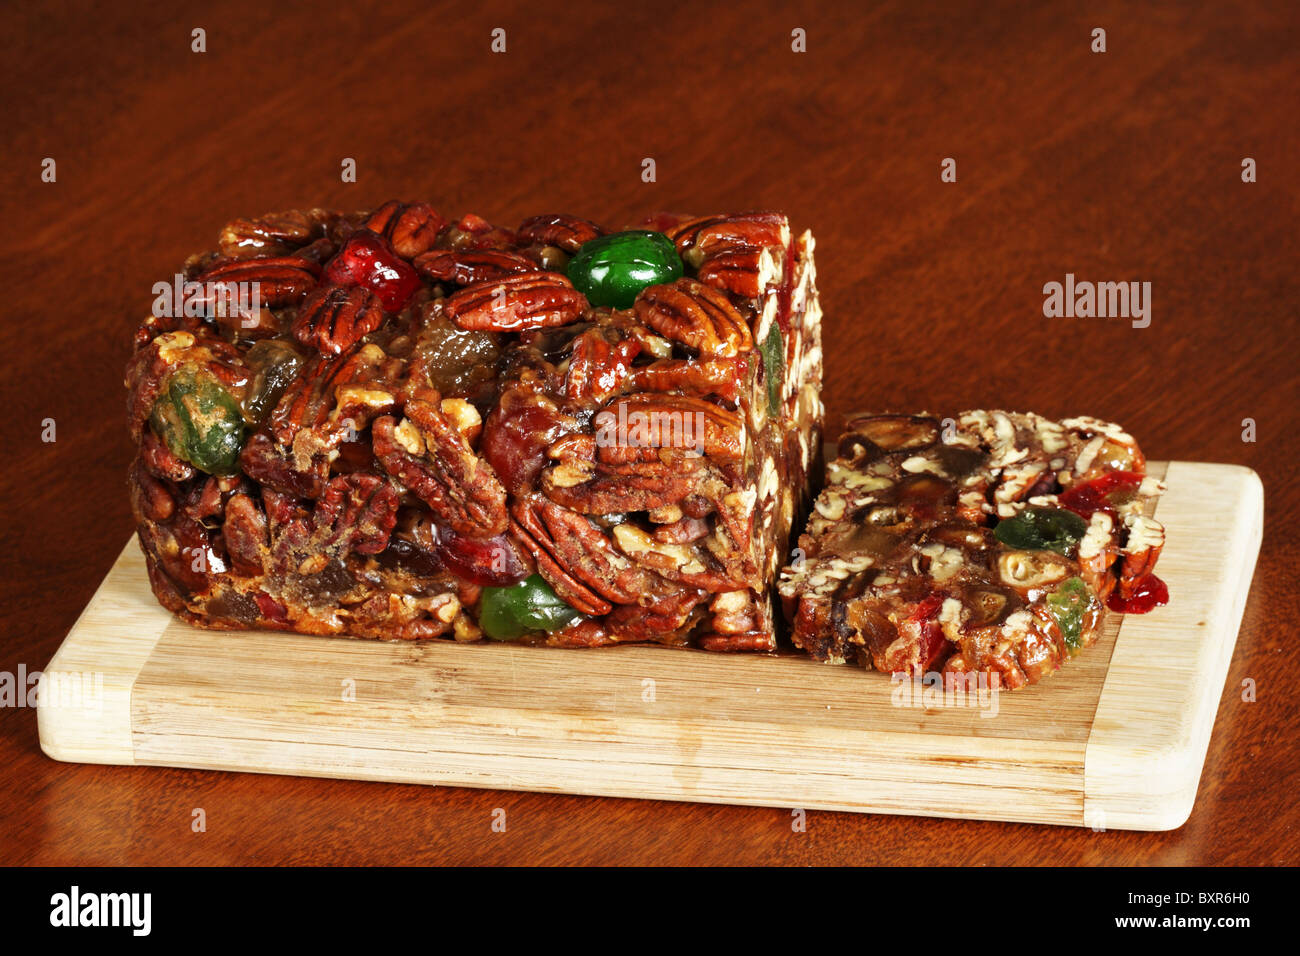 sliced holiday fruit cake on a wooden cutting board Stock Photo